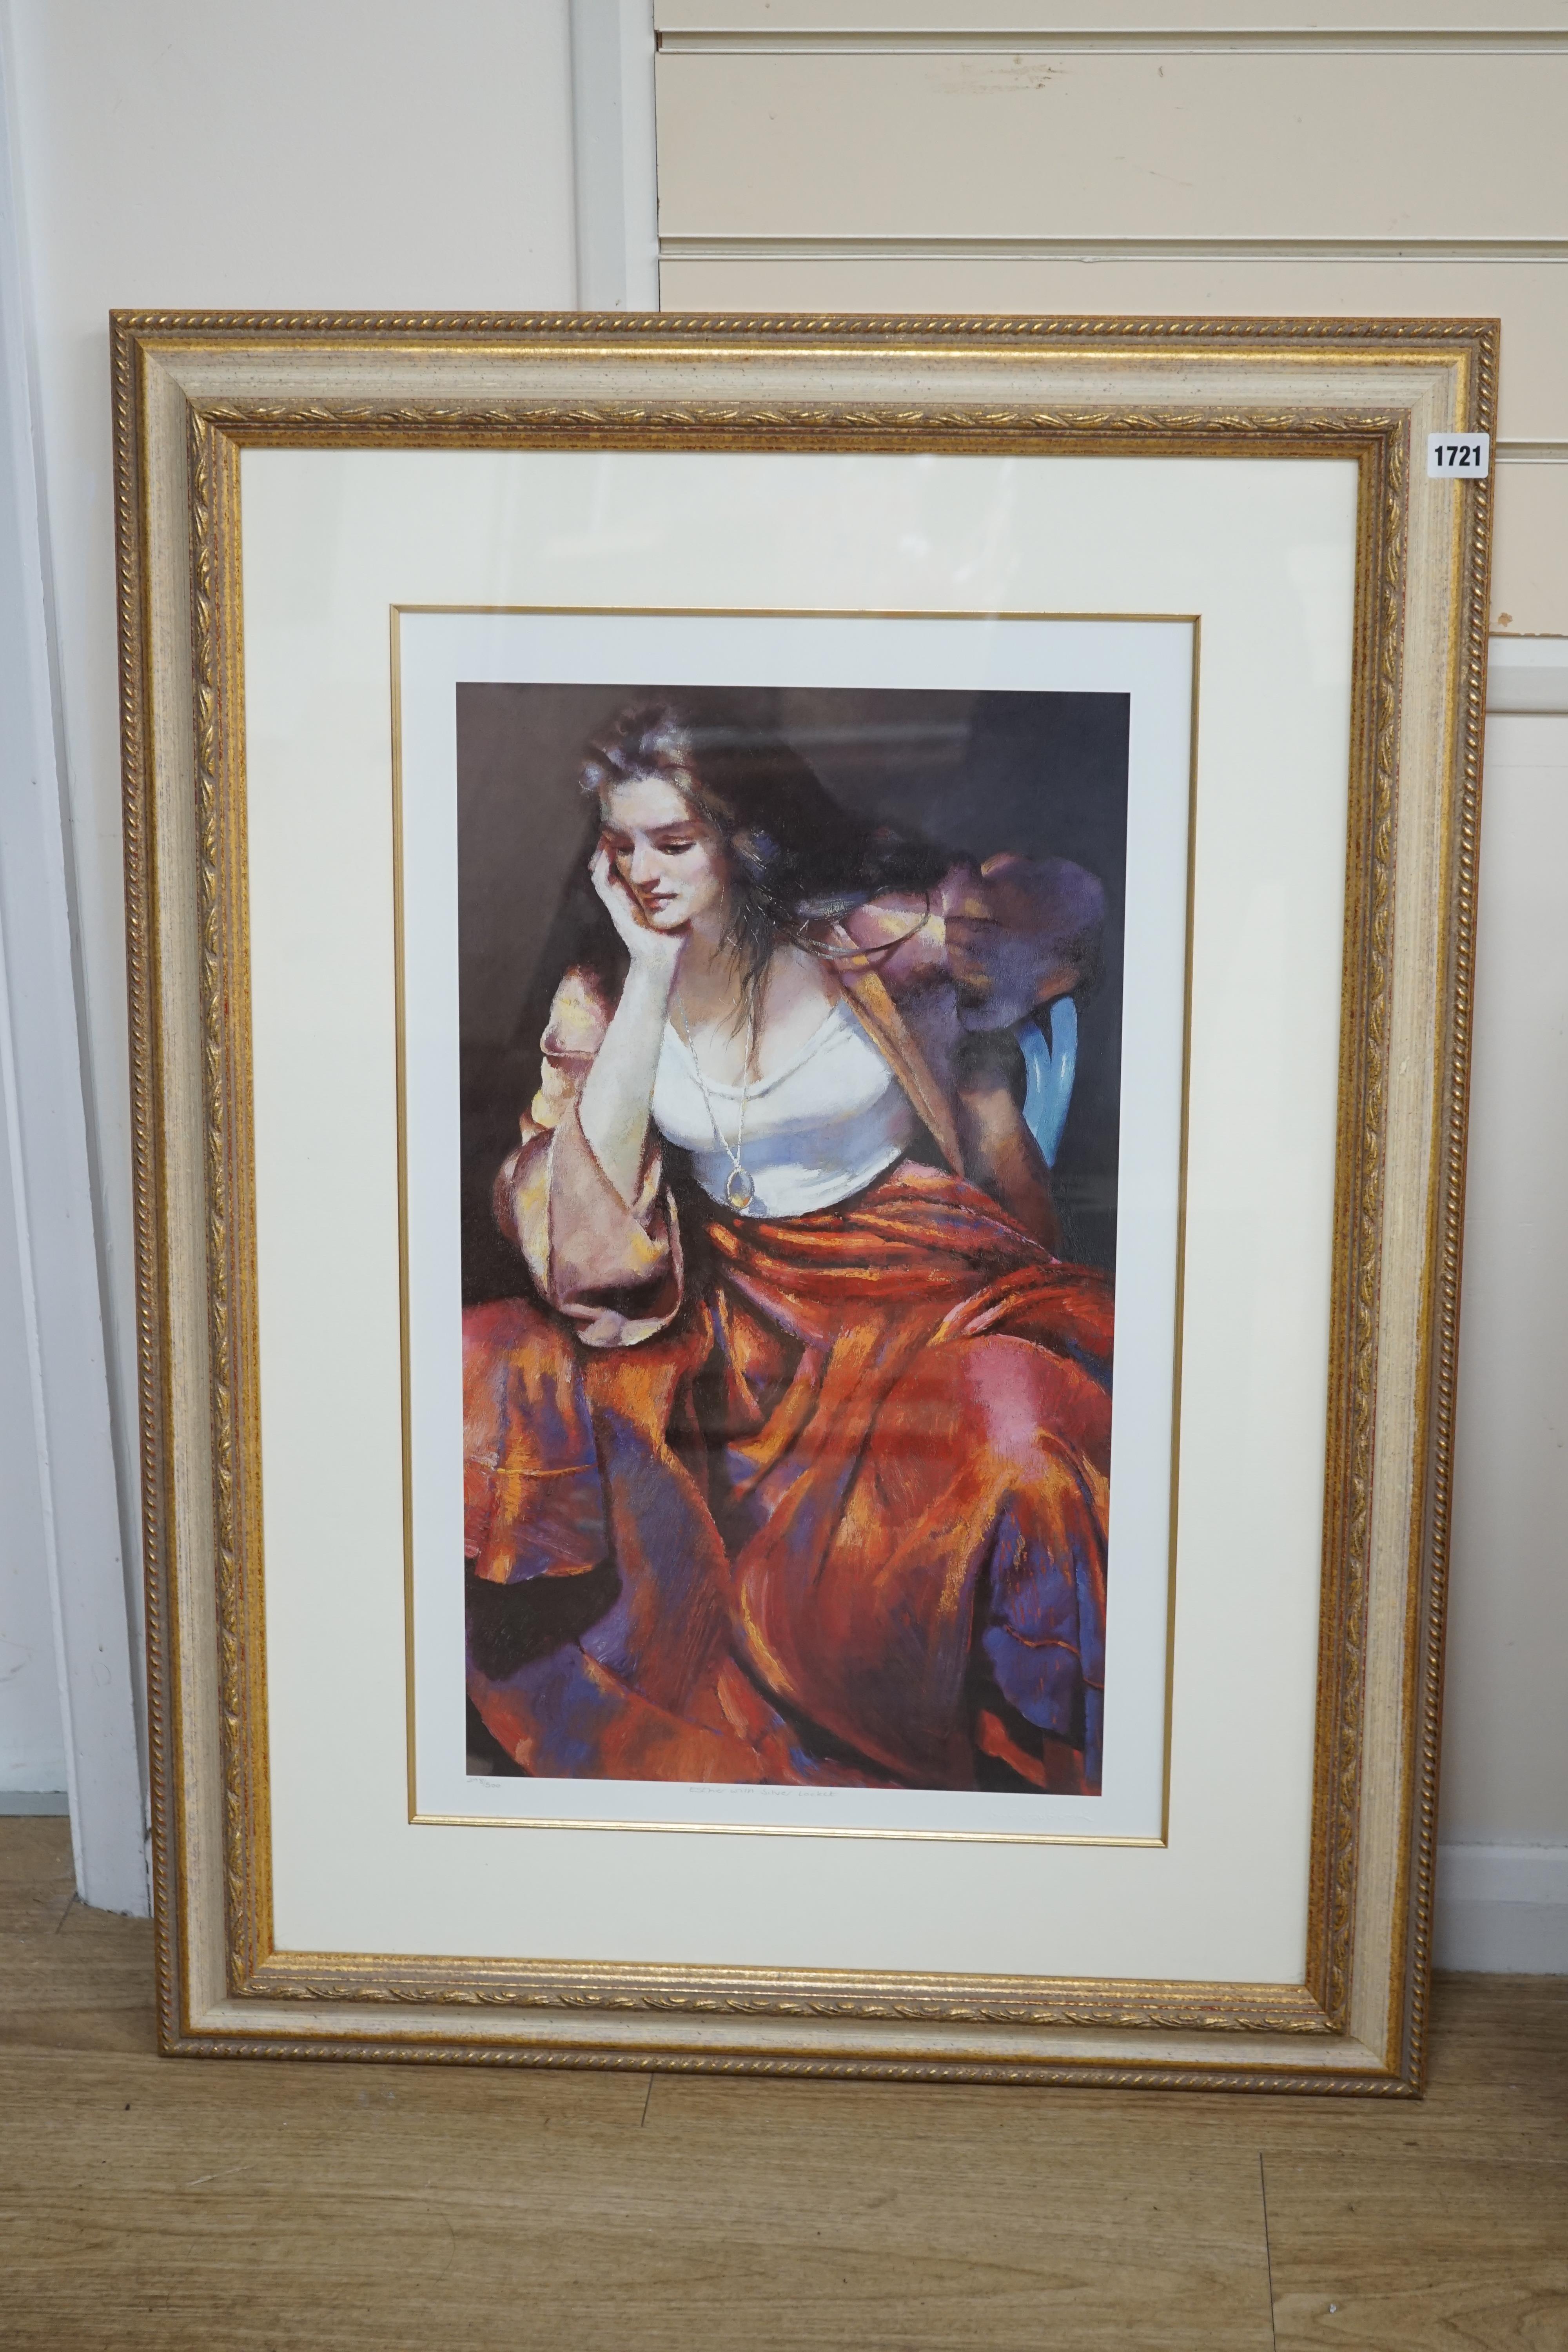 Robert Lenkiewicz (1941-2002), offset lithograph blind stamp signature, 'Esther with silver locket', title in pencil, 298/500, 60 x 35cm. Condition - good